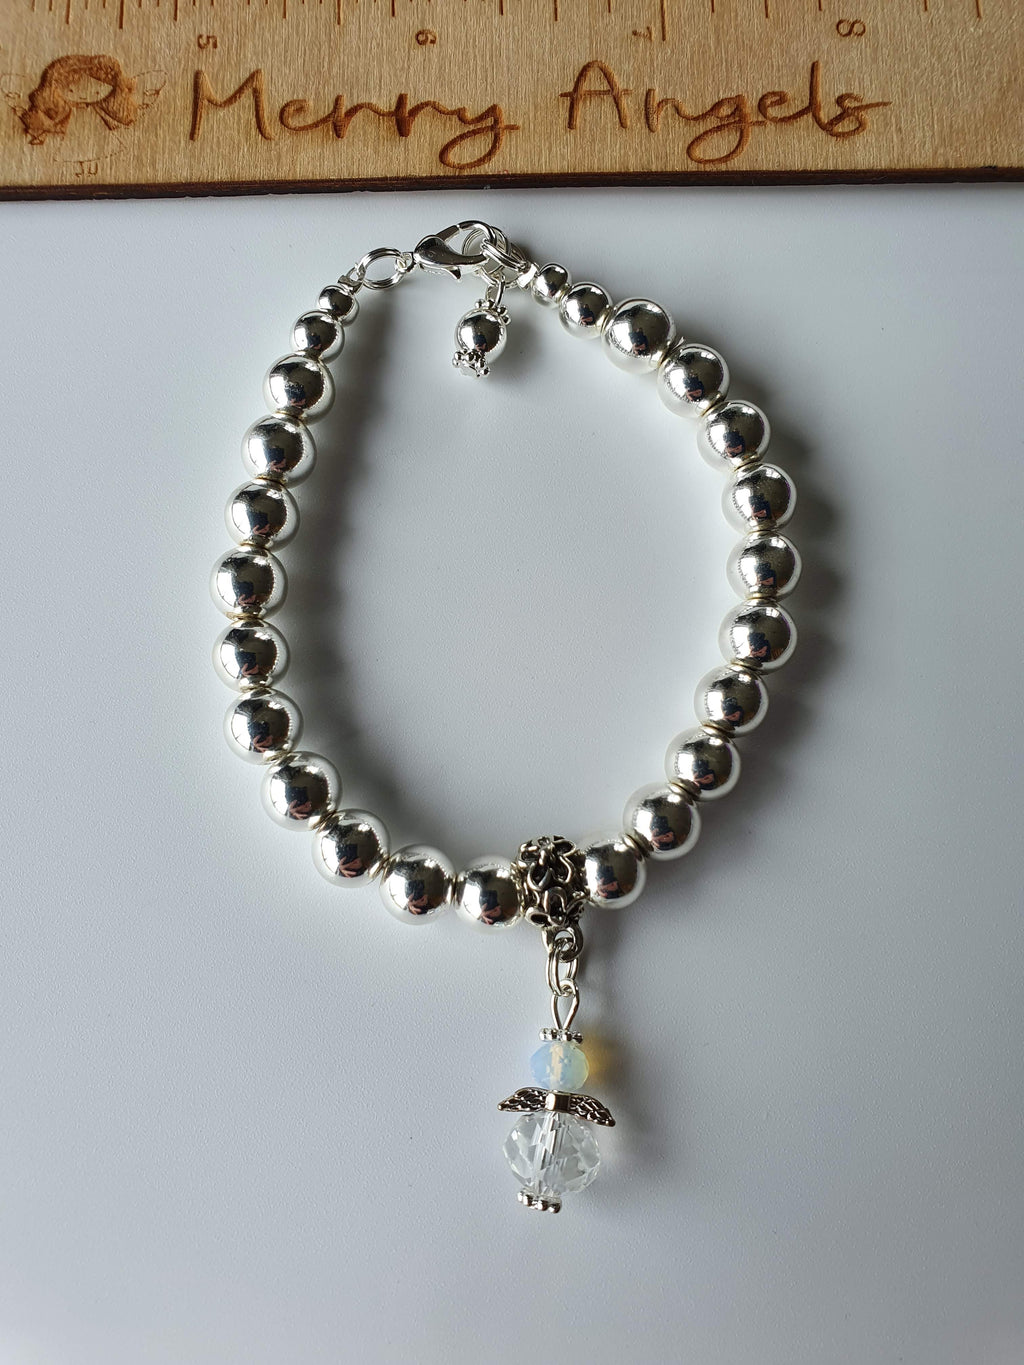 This is a picture of a silver bead bracelet with a clear angel hanging from the centre of the bracelet